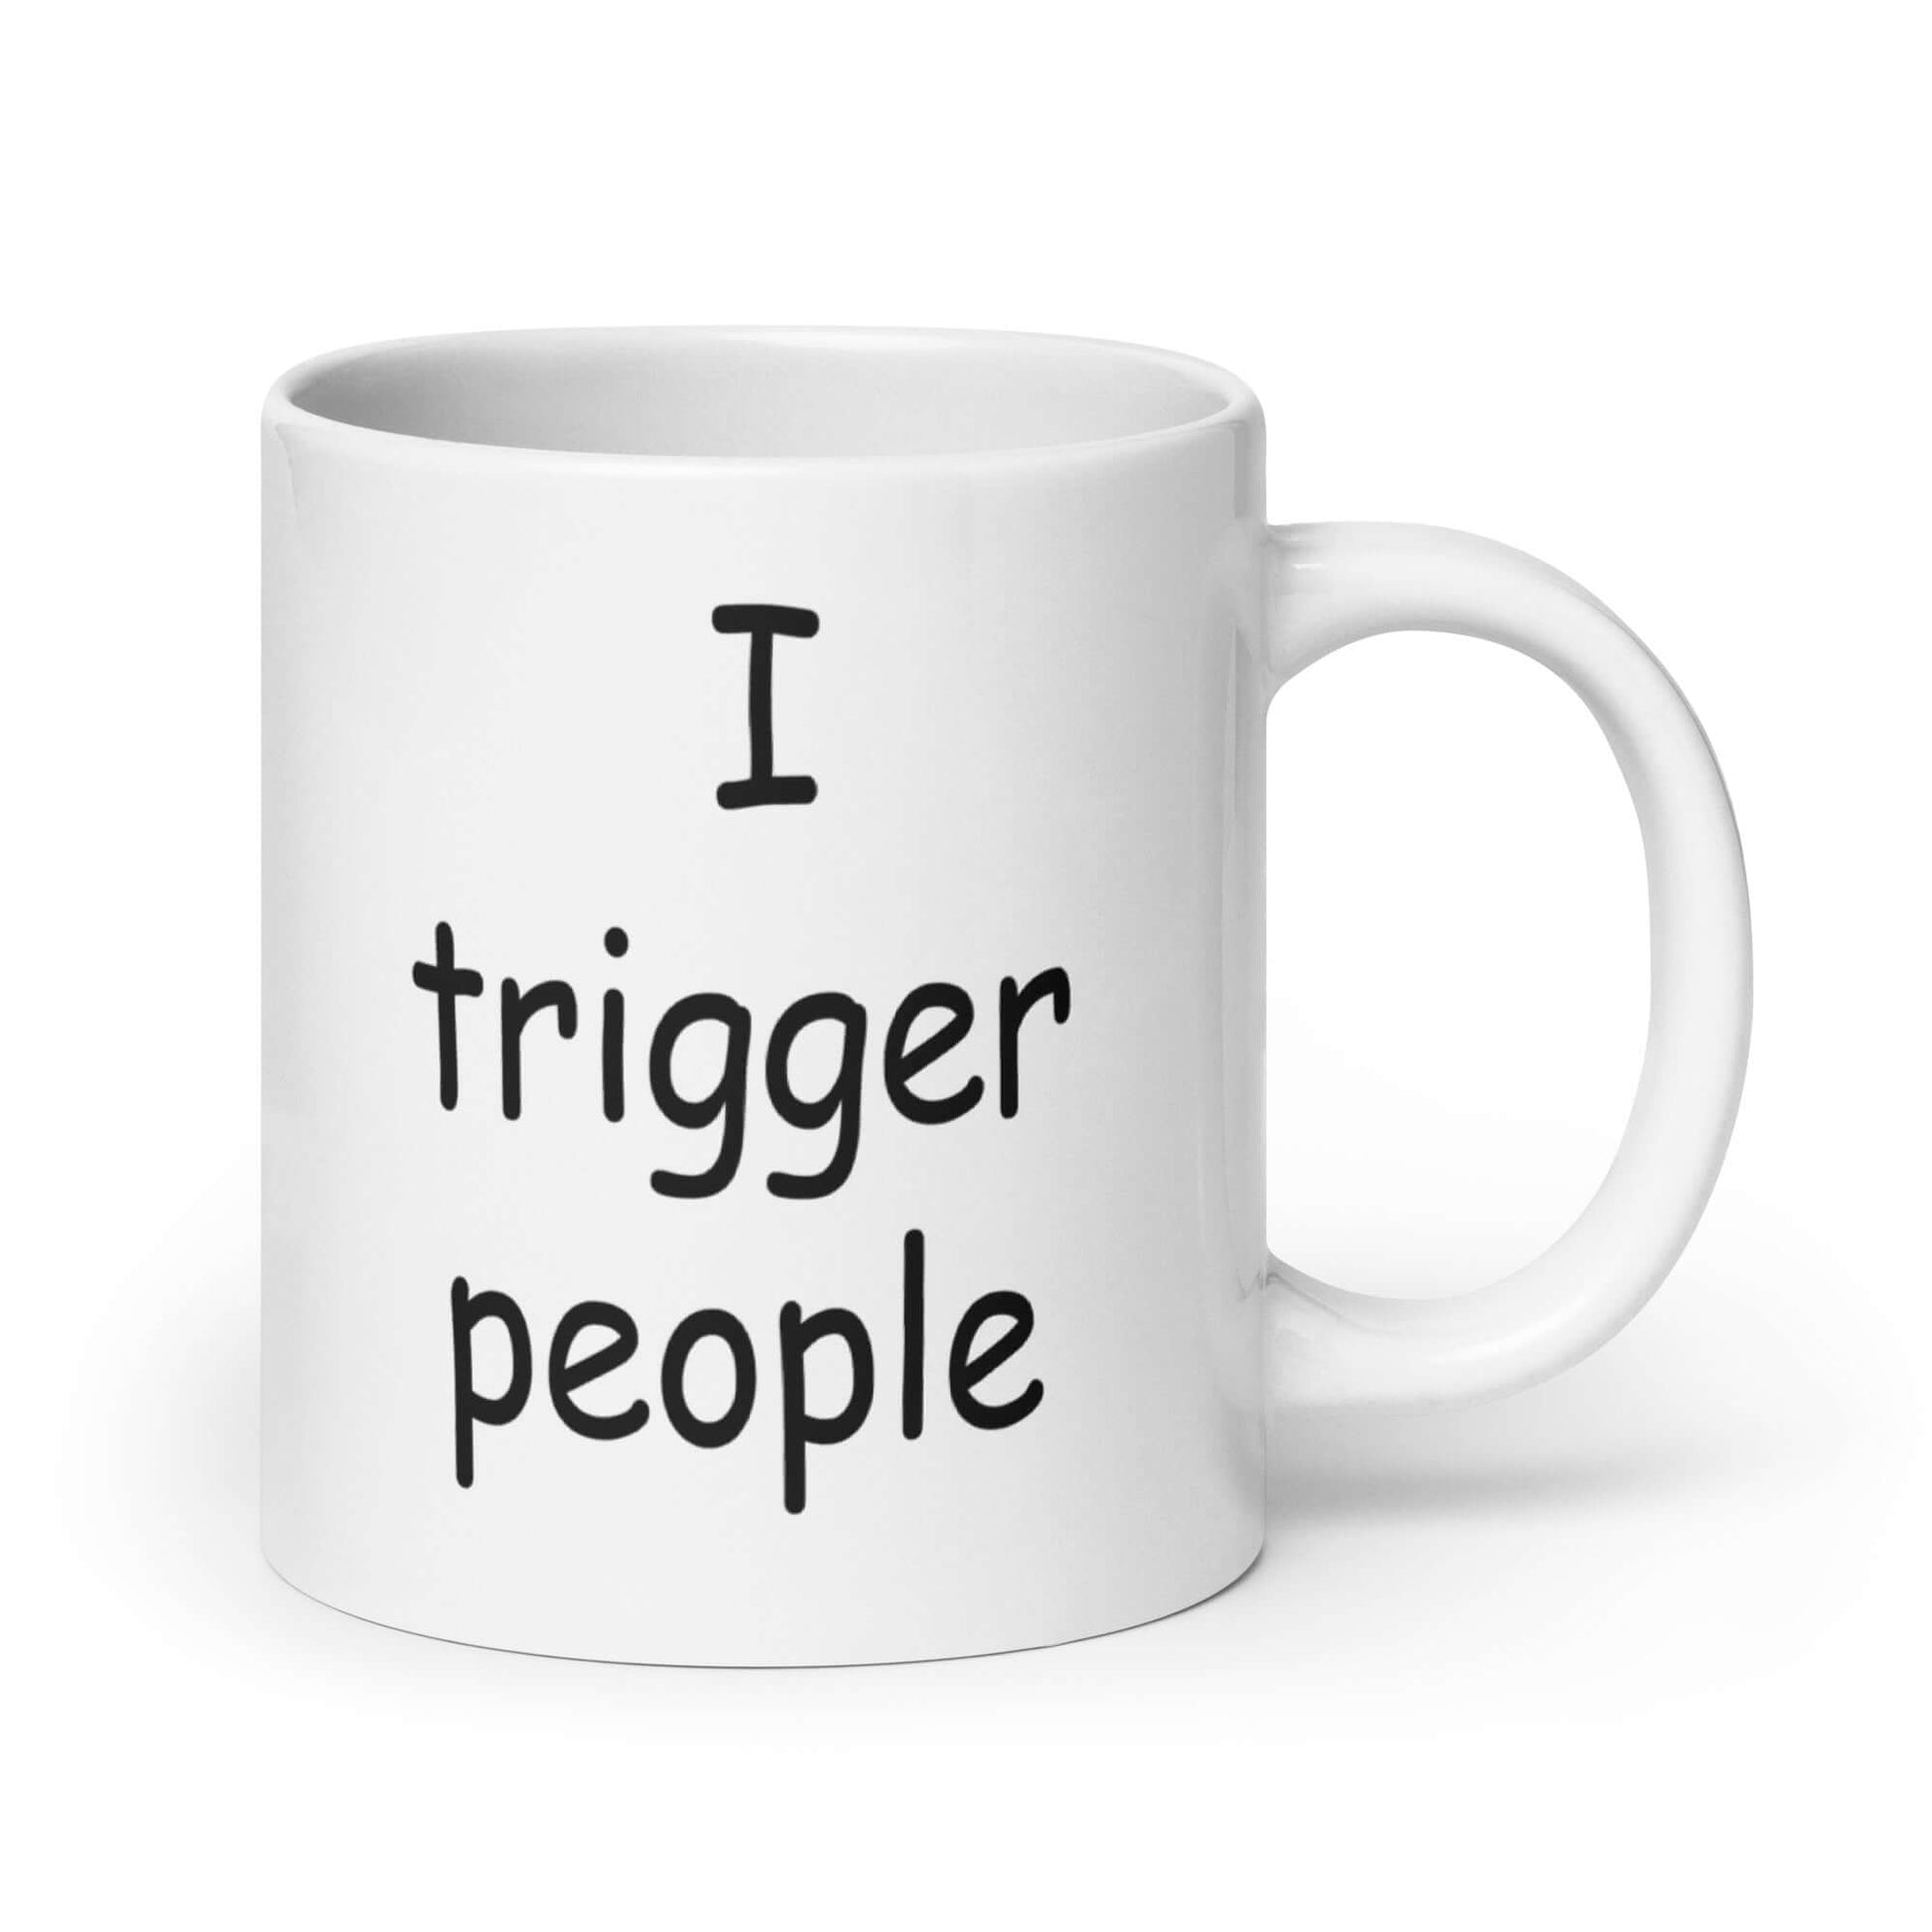 White ceramic coffee mug with the phrase I trigger people printed on both sides.